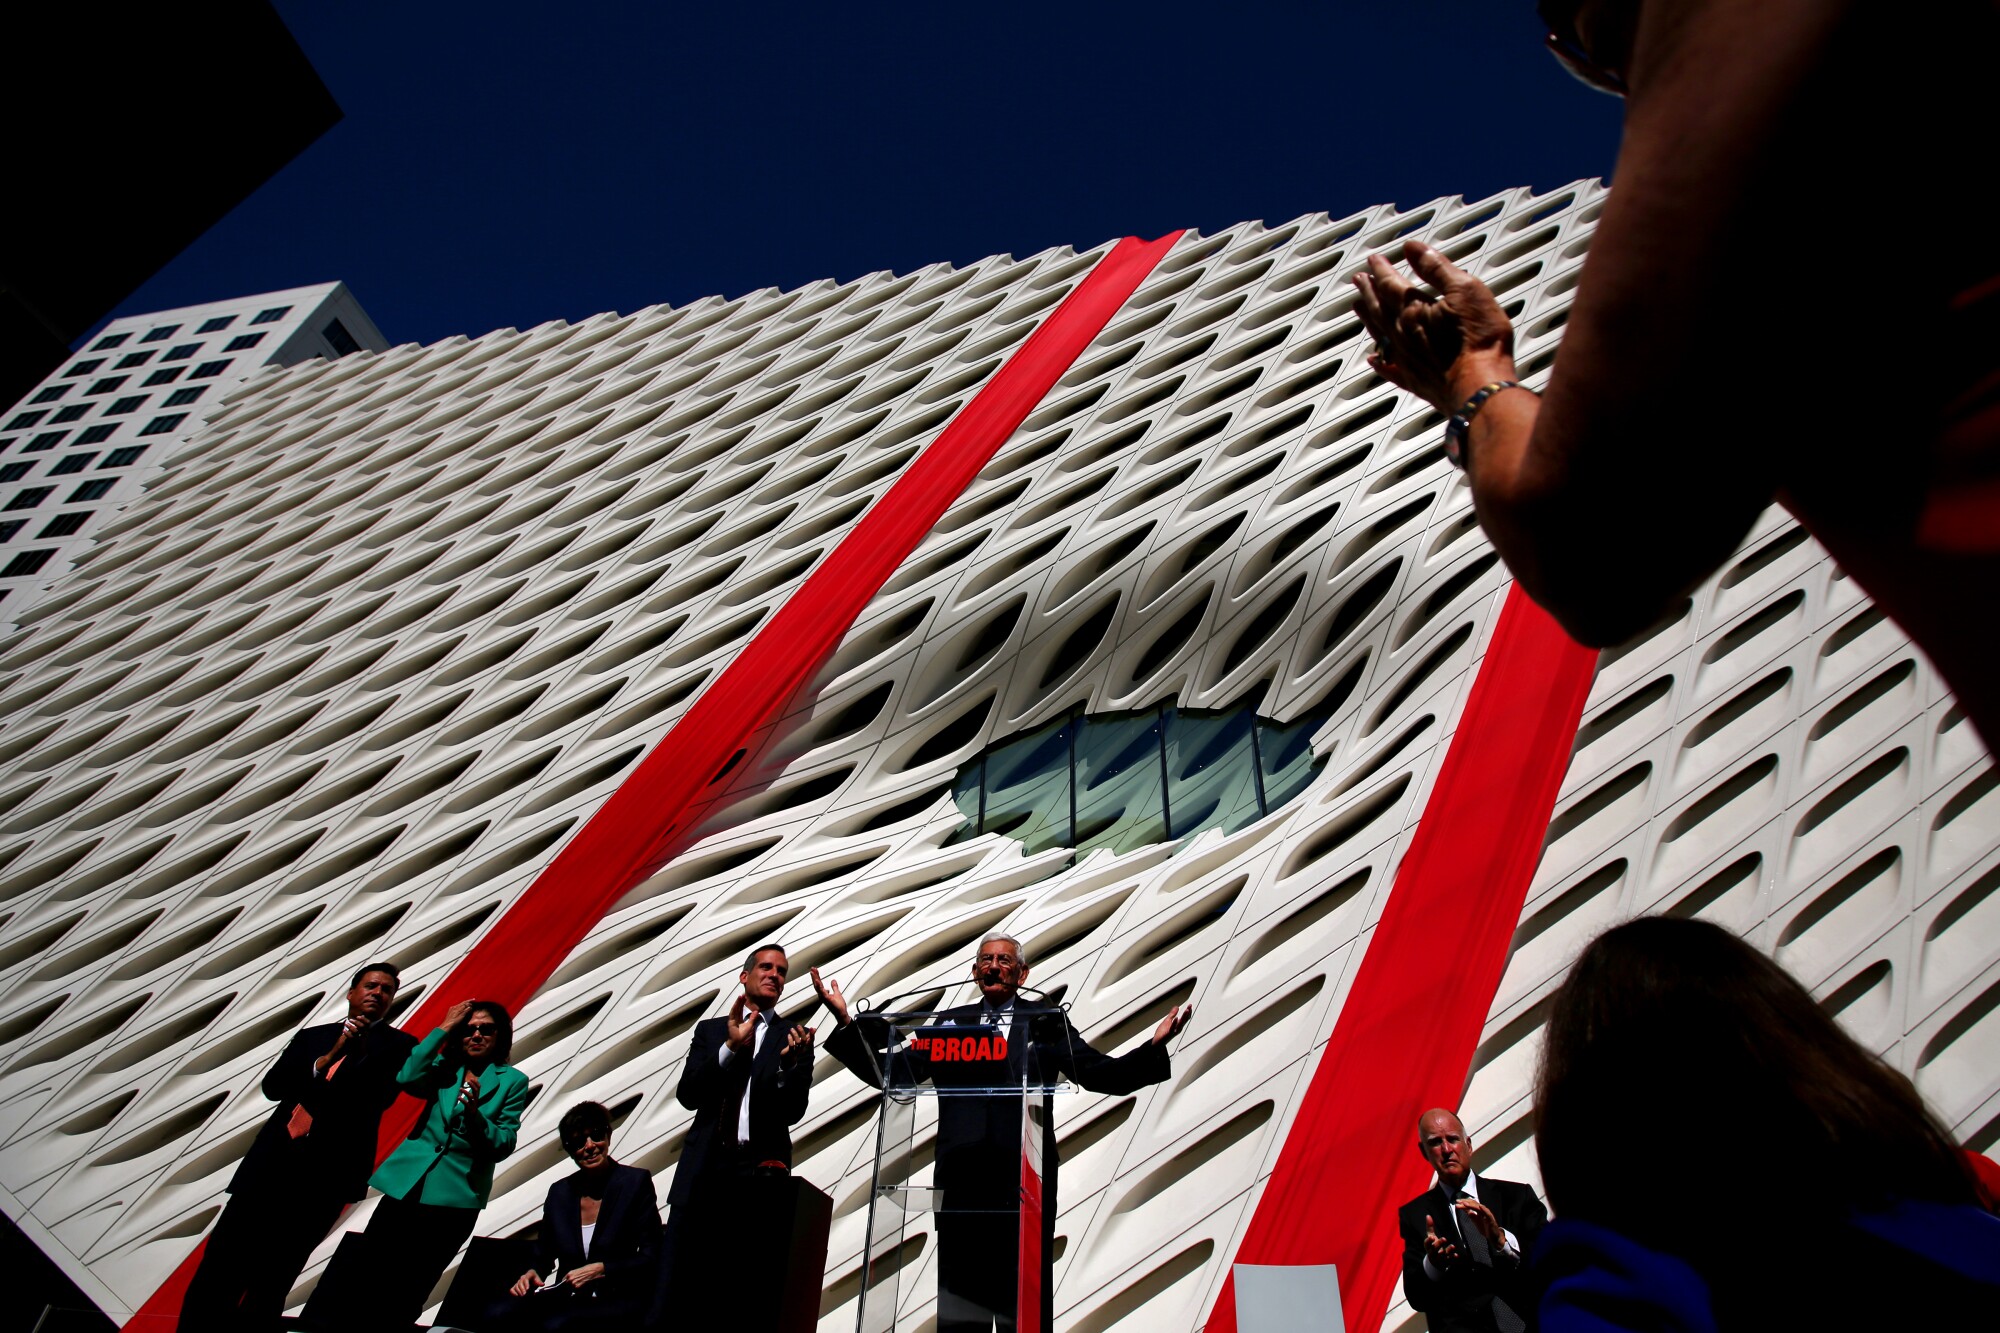 Eli Broad speaks on a podium in front of a building facade in the shape of a honeycomb with two vertical red stripes. 